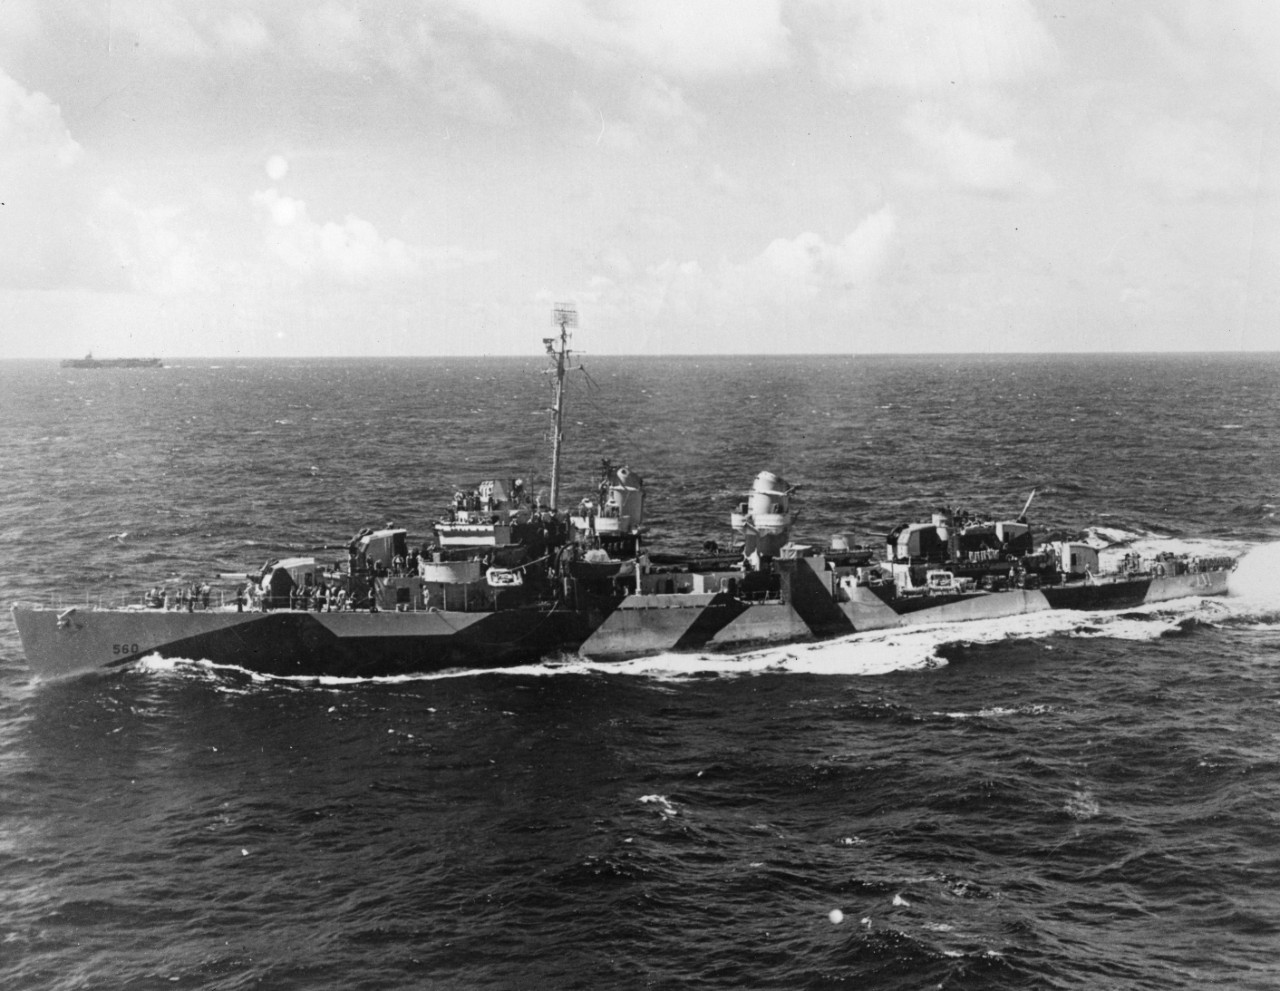 USS Morrison (DD-560) underway, in a photo taken from USS Gambier Bay (CVE-73). Another aircraft carrier can be seen in the distance.